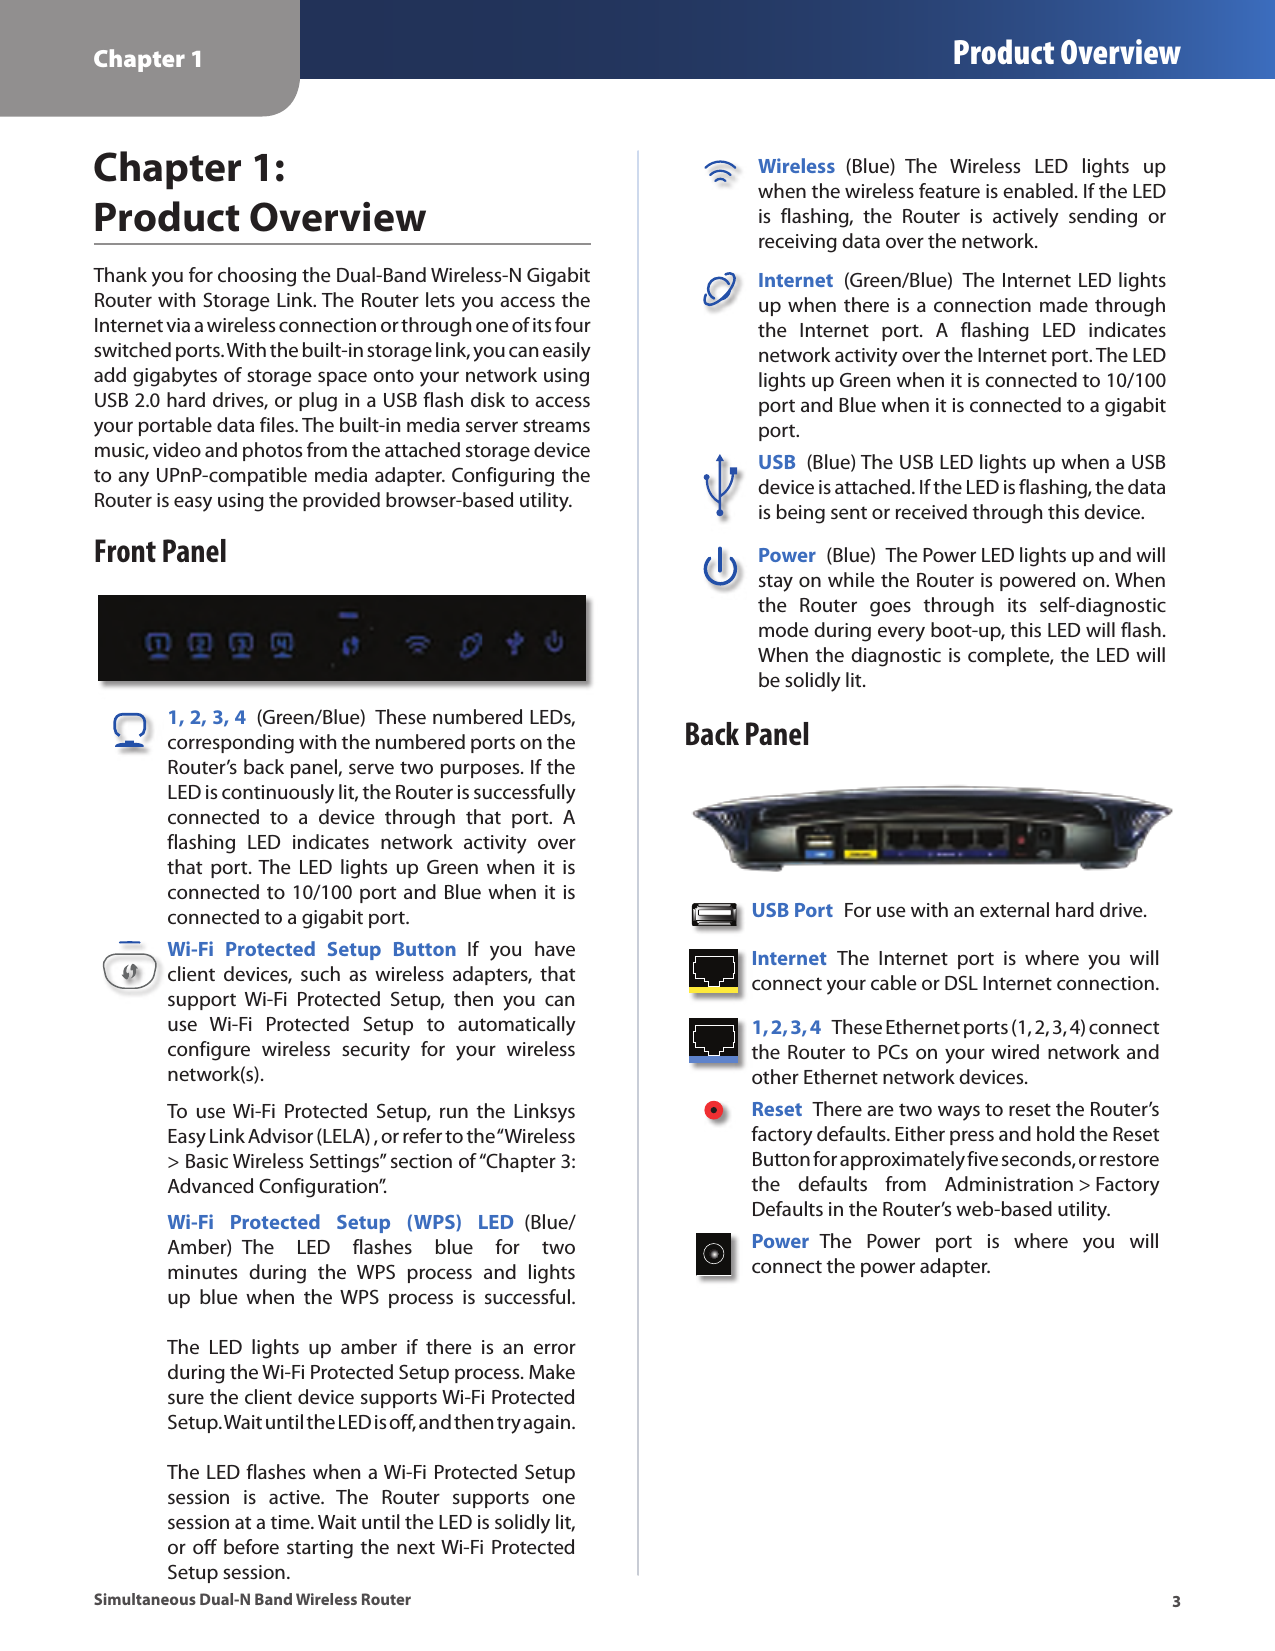 Chapter 1 Product Overview3Simultaneous Dual-N Band Wireless RouterChapter 1:  Product OverviewThank you for choosing the Dual-Band Wireless-N Gigabit Router with Storage Link. The Router lets you access the Internet via a wireless connection or through one of its four switched ports. With the built-in storage link, you can easily add gigabytes of storage space onto your network using USB 2.0 hard drives, or plug in a USB flash disk to access your portable data files. The built-in media server streams music, video and photos from the attached storage device to any UPnP-compatible media adapter. Configuring the Router is easy using the provided browser-based utility.Front Panel1, 2, 3, 4  (Green/Blue)  These numbered LEDs, corresponding with the numbered ports on the Router’s back panel, serve two purposes. If the LED is continuously lit, the Router is successfully connected  to  a  device  through  that  port.  A flashing  LED  indicates  network  activity  over that  port. The  LED  lights up  Green  when  it is connected to 10/100 port and Blue when it is connected to a gigabit port. Wi-Fi  Protected  Setup  Button  If  you  have client  devices,  such  as  wireless  adapters,  that support  Wi-Fi  Protected  Setup,  then  you  can use  Wi-Fi  Protected  Setup  to  automatically configure  wireless  security  for  your  wireless network(s).To  use  Wi-Fi  Protected  Setup,  run  the  Linksys Easy Link Advisor (LELA) , or refer to the “Wireless &gt; Basic Wireless Settings” section of “Chapter 3: Advanced Configuration”.Wi-Fi  Protected  Setup  (WPS)  LED  (Blue/Amber)  The  LED  flashes  blue  for  two minutes  during  the  WPS  process  and  lights up  blue  when  the  WPS  process  is  successful.    The  LED  lights  up  amber  if  there  is  an  error during the Wi-Fi Protected Setup process. Make sure the client device supports Wi-Fi Protected Setup. Wait until the LED is off, and then try again.   The LED flashes when a Wi-Fi Protected Setup session  is  active.  The  Router  supports  one session at a time. Wait until the LED is solidly lit, or off before starting the  next Wi-Fi Protected Setup session.Wireless  (Blue)  The  Wireless  LED  lights  up when the wireless feature is enabled. If the LED is  flashing,  the  Router  is  actively  sending  or receiving data over the network.Internet  (Green/Blue)  The Internet LED lights up when there is a connection made through the  Internet  port.  A  flashing  LED  indicates network activity over the Internet port. The LED lights up Green when it is connected to 10/100 port and Blue when it is connected to a gigabit port. USB  (Blue) The USB LED lights up when a USB device is attached. If the LED is flashing, the data is being sent or received through this device.Power  (Blue)  The Power LED lights up and will stay on while the Router is powered on. When the  Router  goes  through  its  self-diagnostic mode during every boot-up, this LED will flash. When the diagnostic is complete, the LED will be solidly lit.Back PanelUSB Port  For use with an external hard drive.Internet  The  Internet  port  is  where  you  will connect your cable or DSL Internet connection. 1, 2, 3, 4  These Ethernet ports (1, 2, 3, 4) connect the Router to PCs on your wired network and other Ethernet network devices. Reset  There are two ways to reset the Router’s factory defaults. Either press and hold the Reset Button for approximately five seconds, or restore the  defaults  from  Administration &gt; Factory Defaults in the Router’s web-based utility. Power  The  Power  port  is  where  you  will  connect the power adapter.